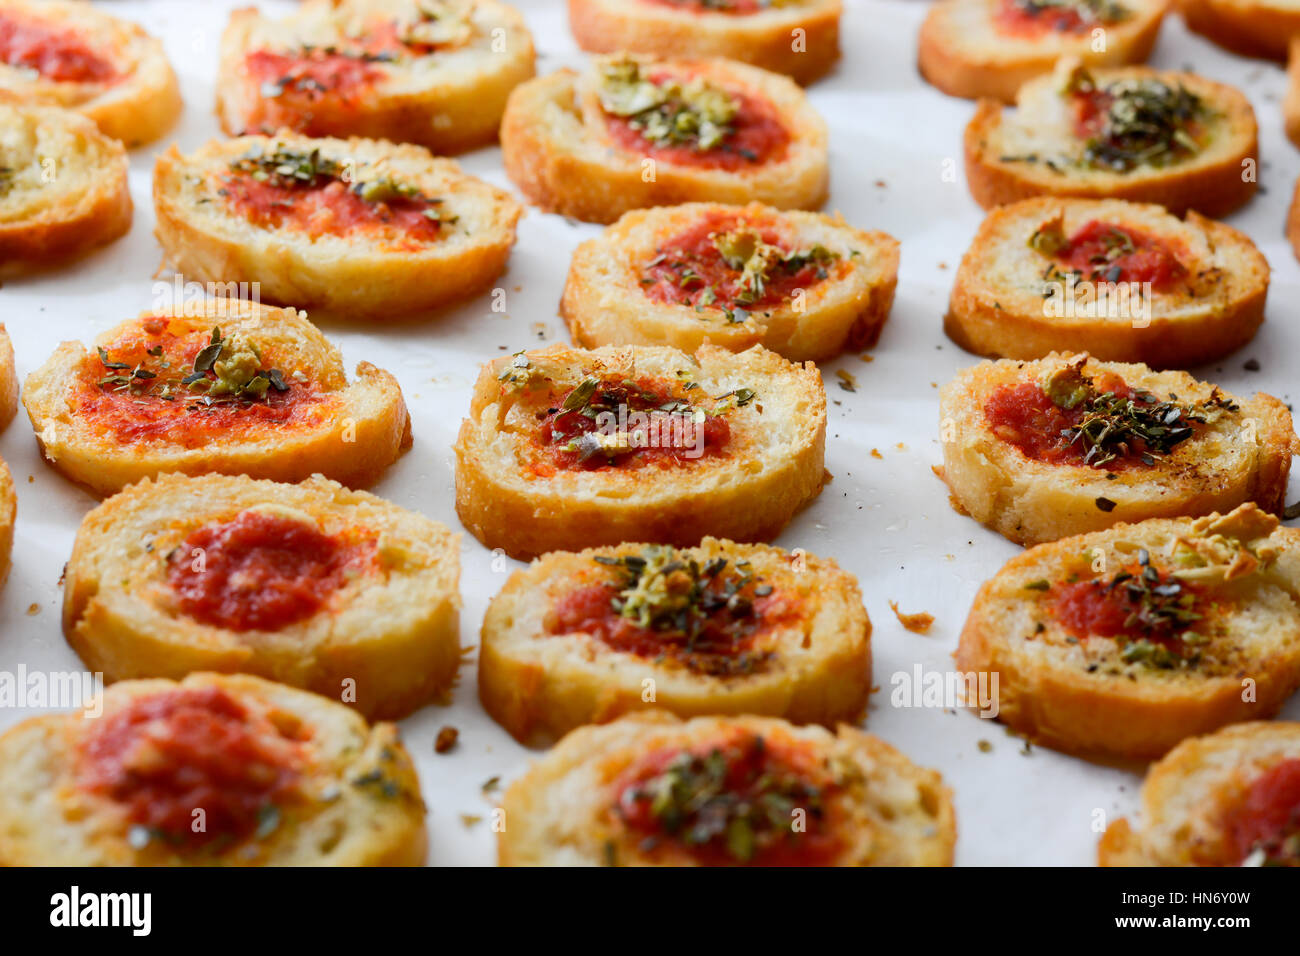 Fresh baked light and delicious bruschetta appetizers with tomato amd oregano Stock Photo